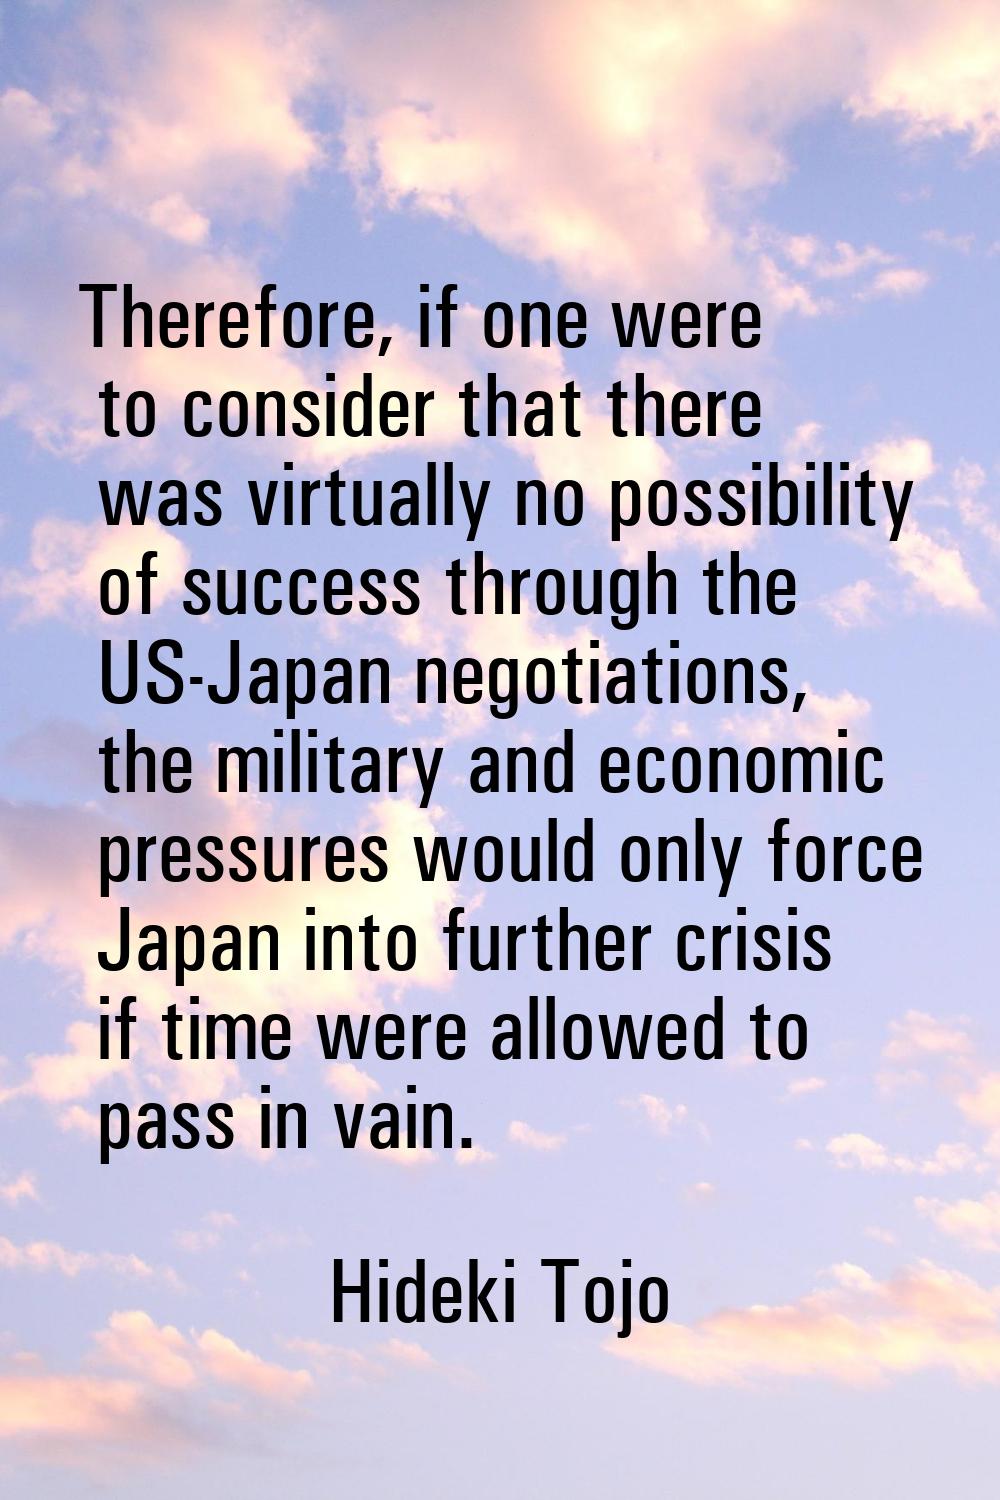 Therefore, if one were to consider that there was virtually no possibility of success through the U